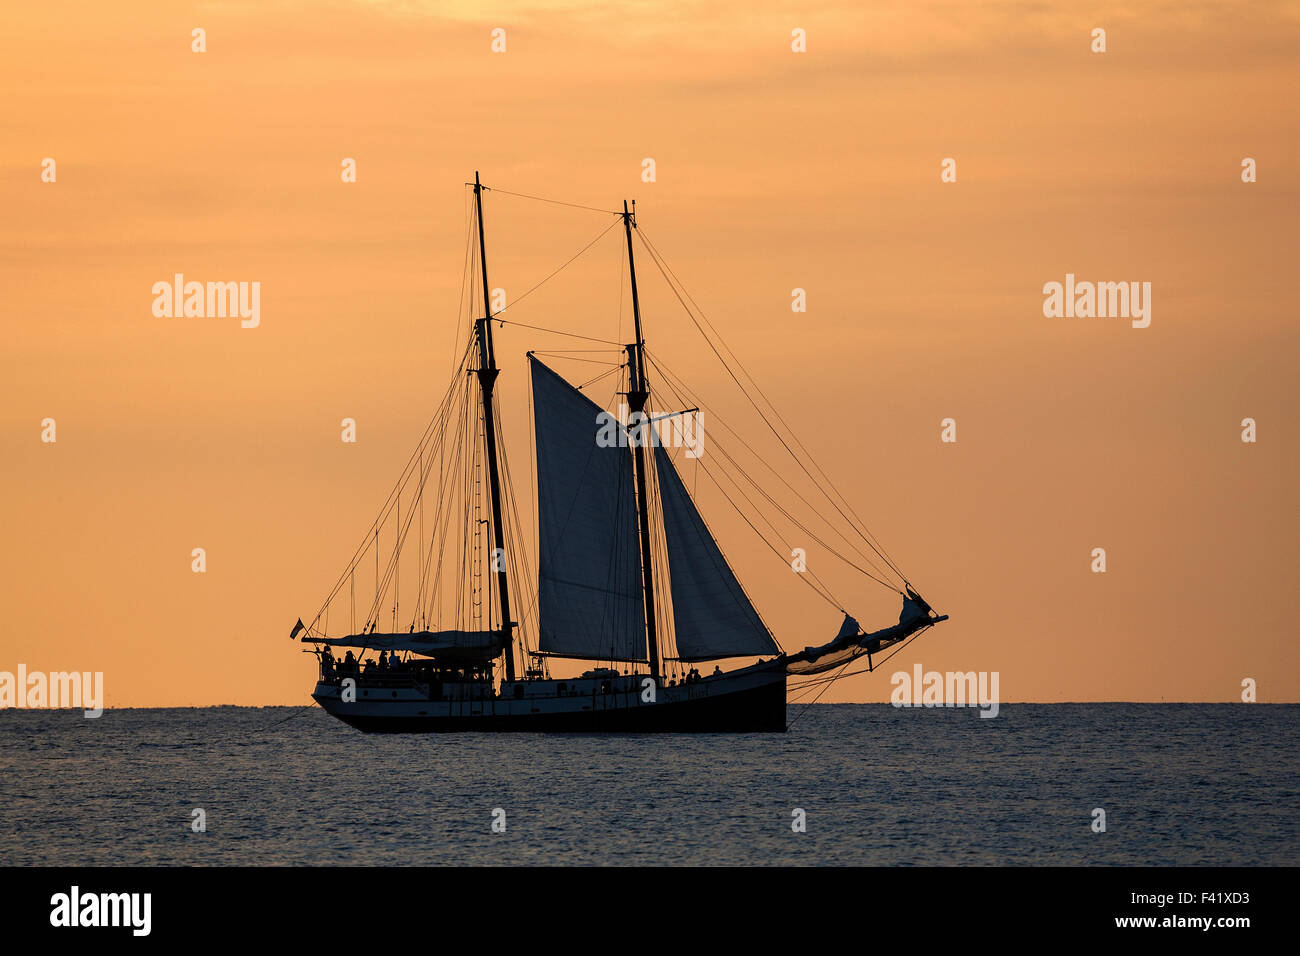 Sailboat in the Beau Vallon Bay in front of an orange sky, sunset, Mahe Island, Seychelles Stock Photo